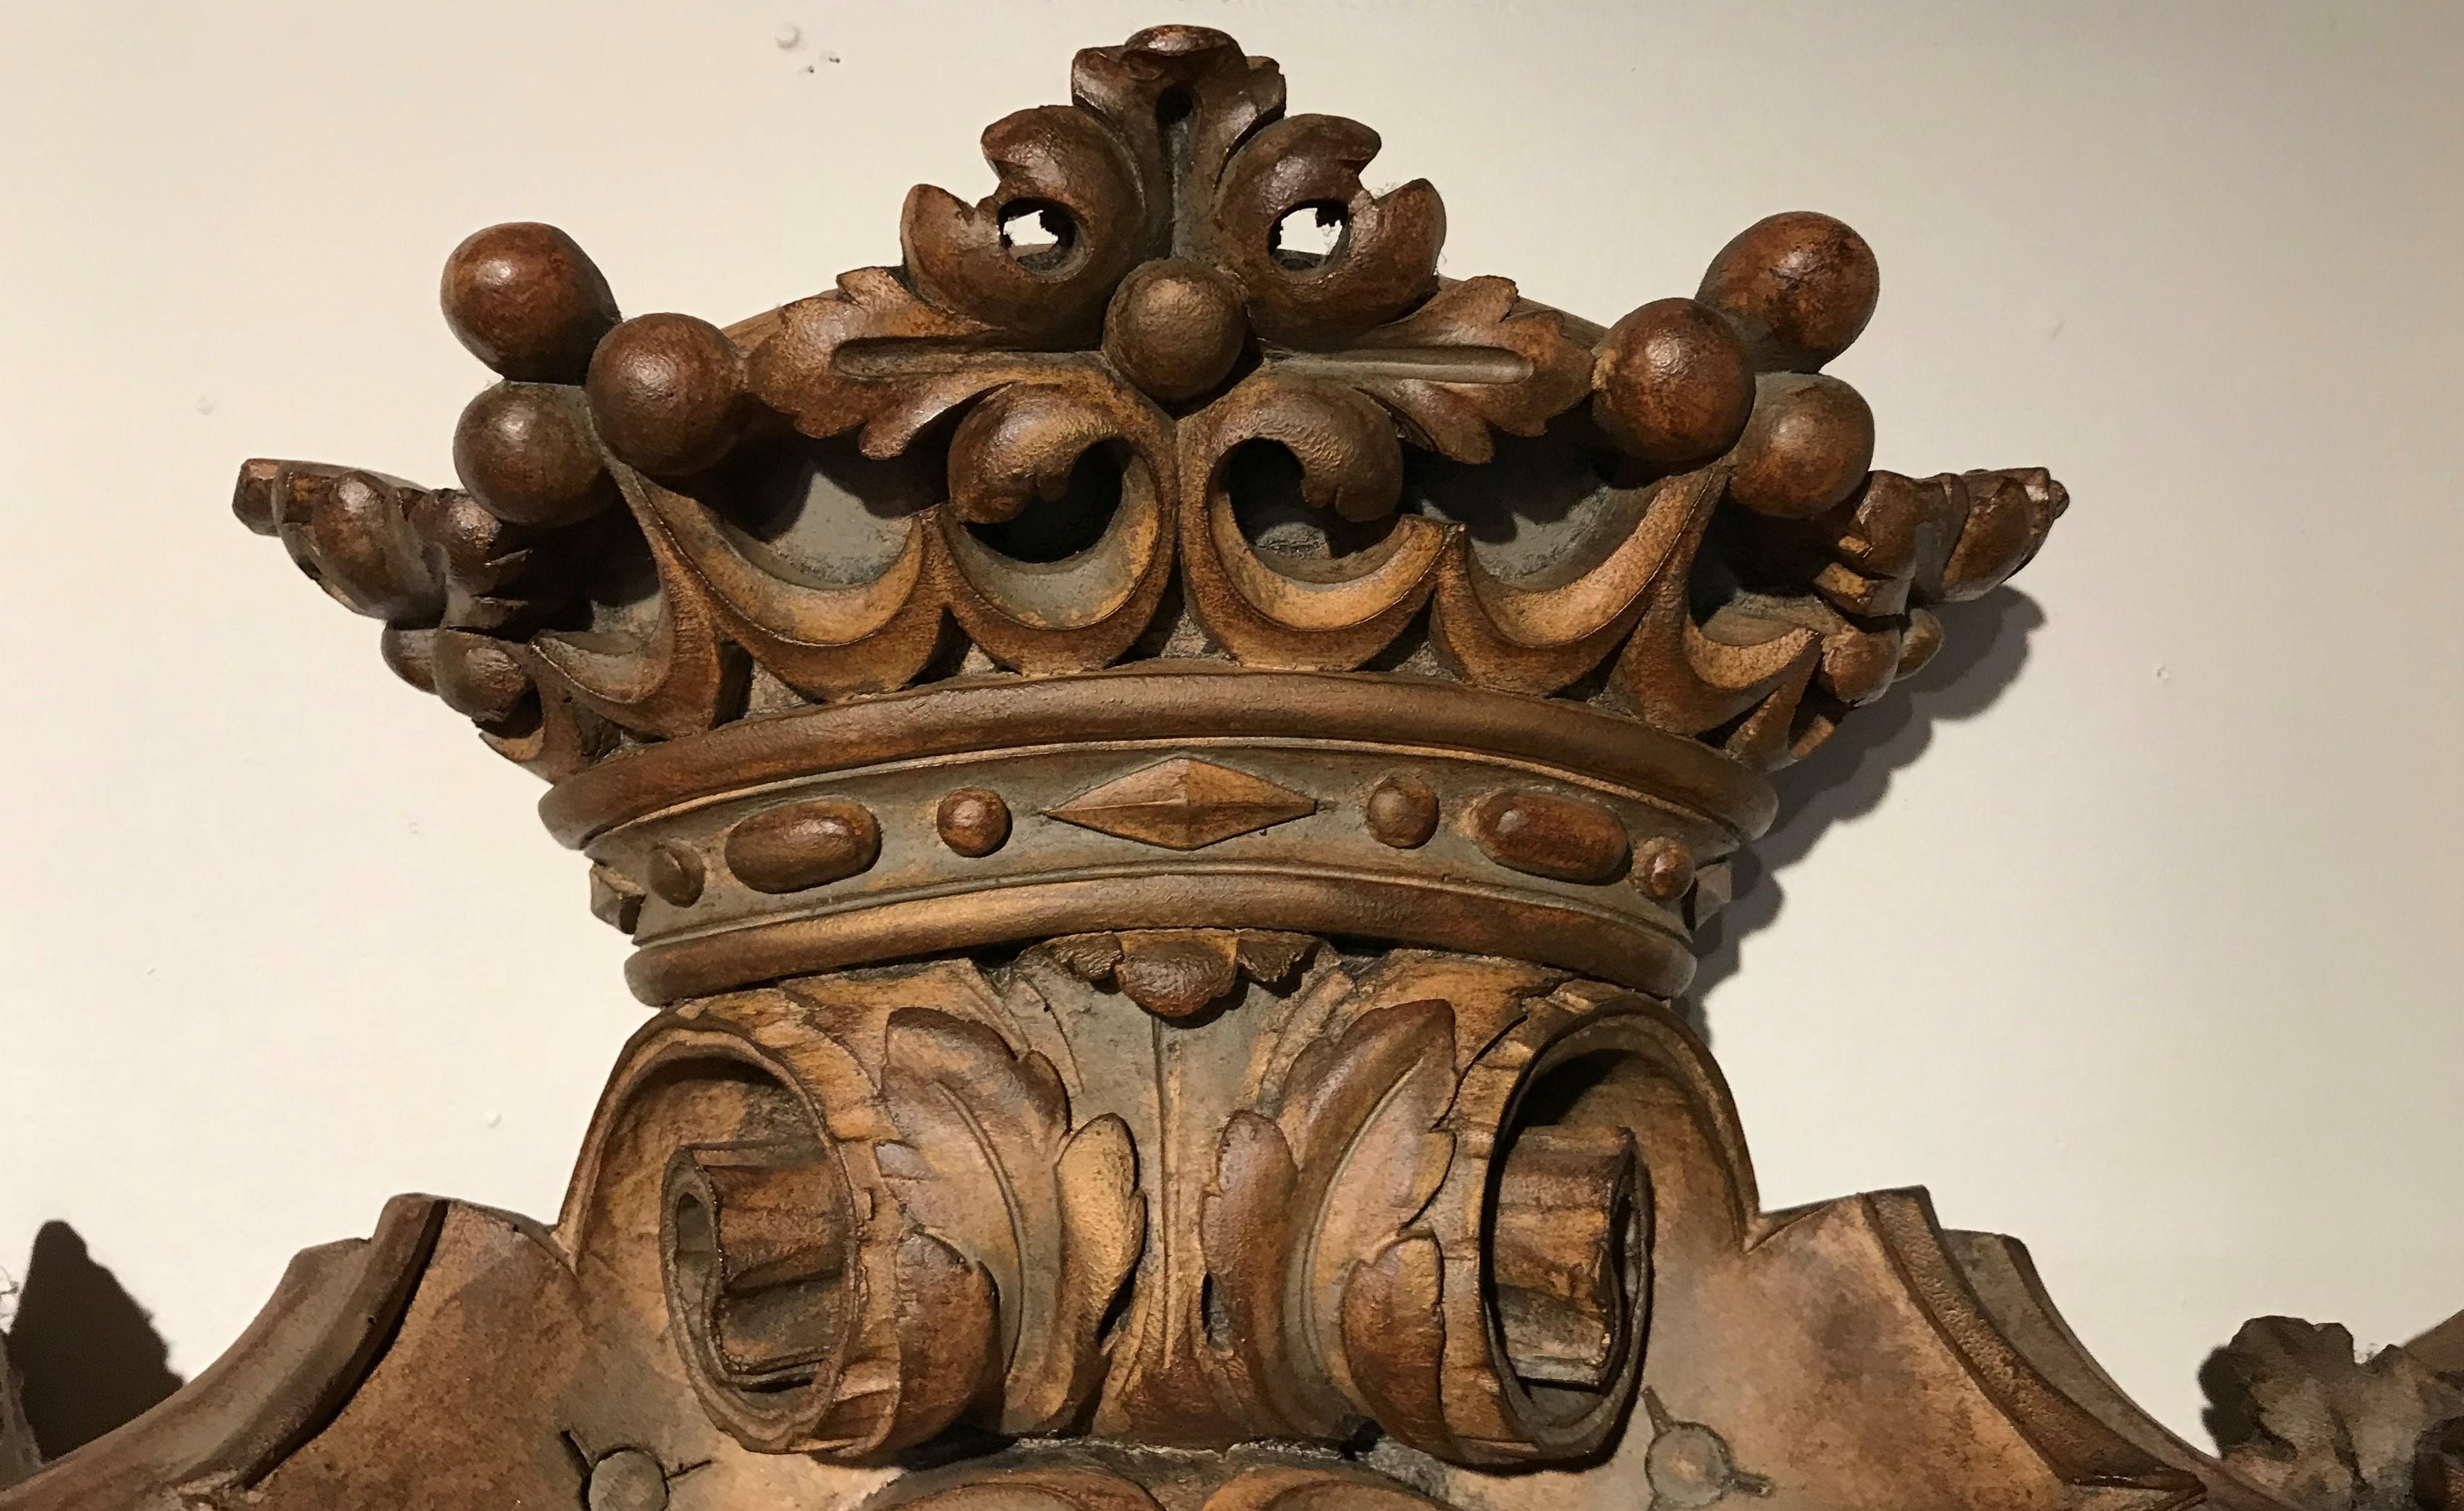 A nicely detailed carved crest with a crown at the top and the letter “M” in the central panel, constructed from wood and composition, European in origin, dating to the 19th century, with great overall patina and minimal imperfections and losses.